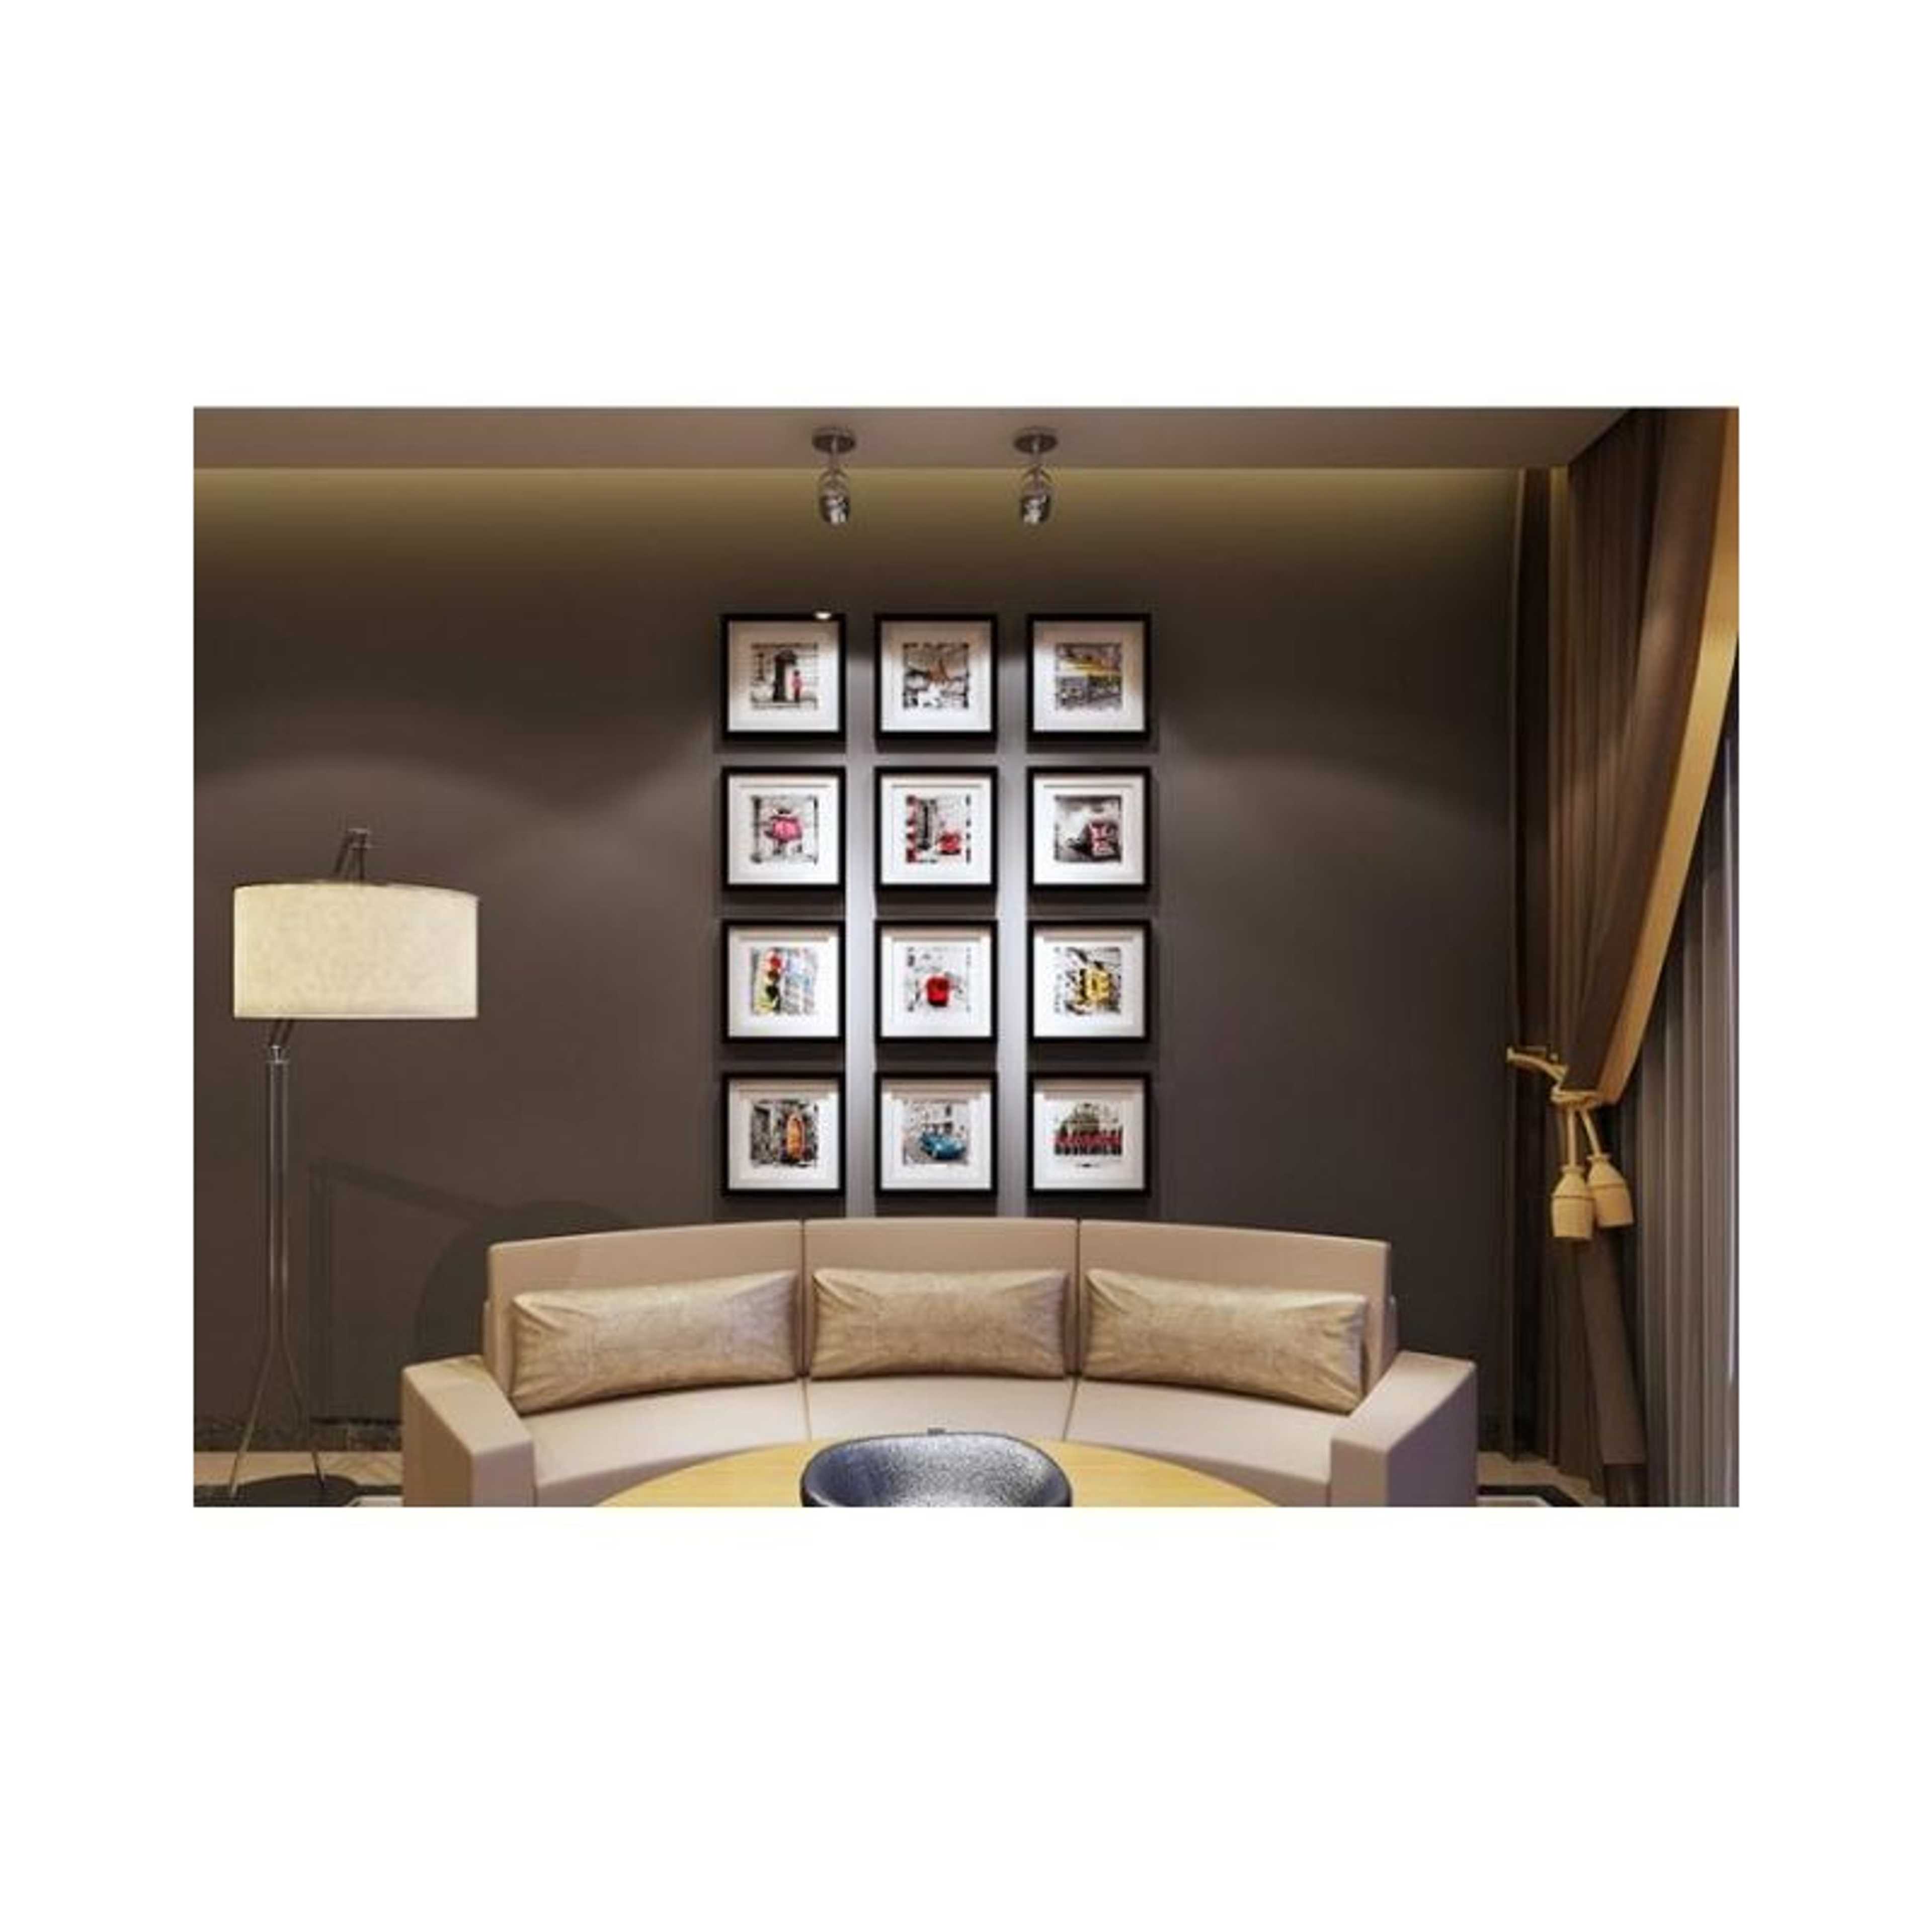 Set of 12 - Photo Frames Collage Wall Hanging Wall Decor Set